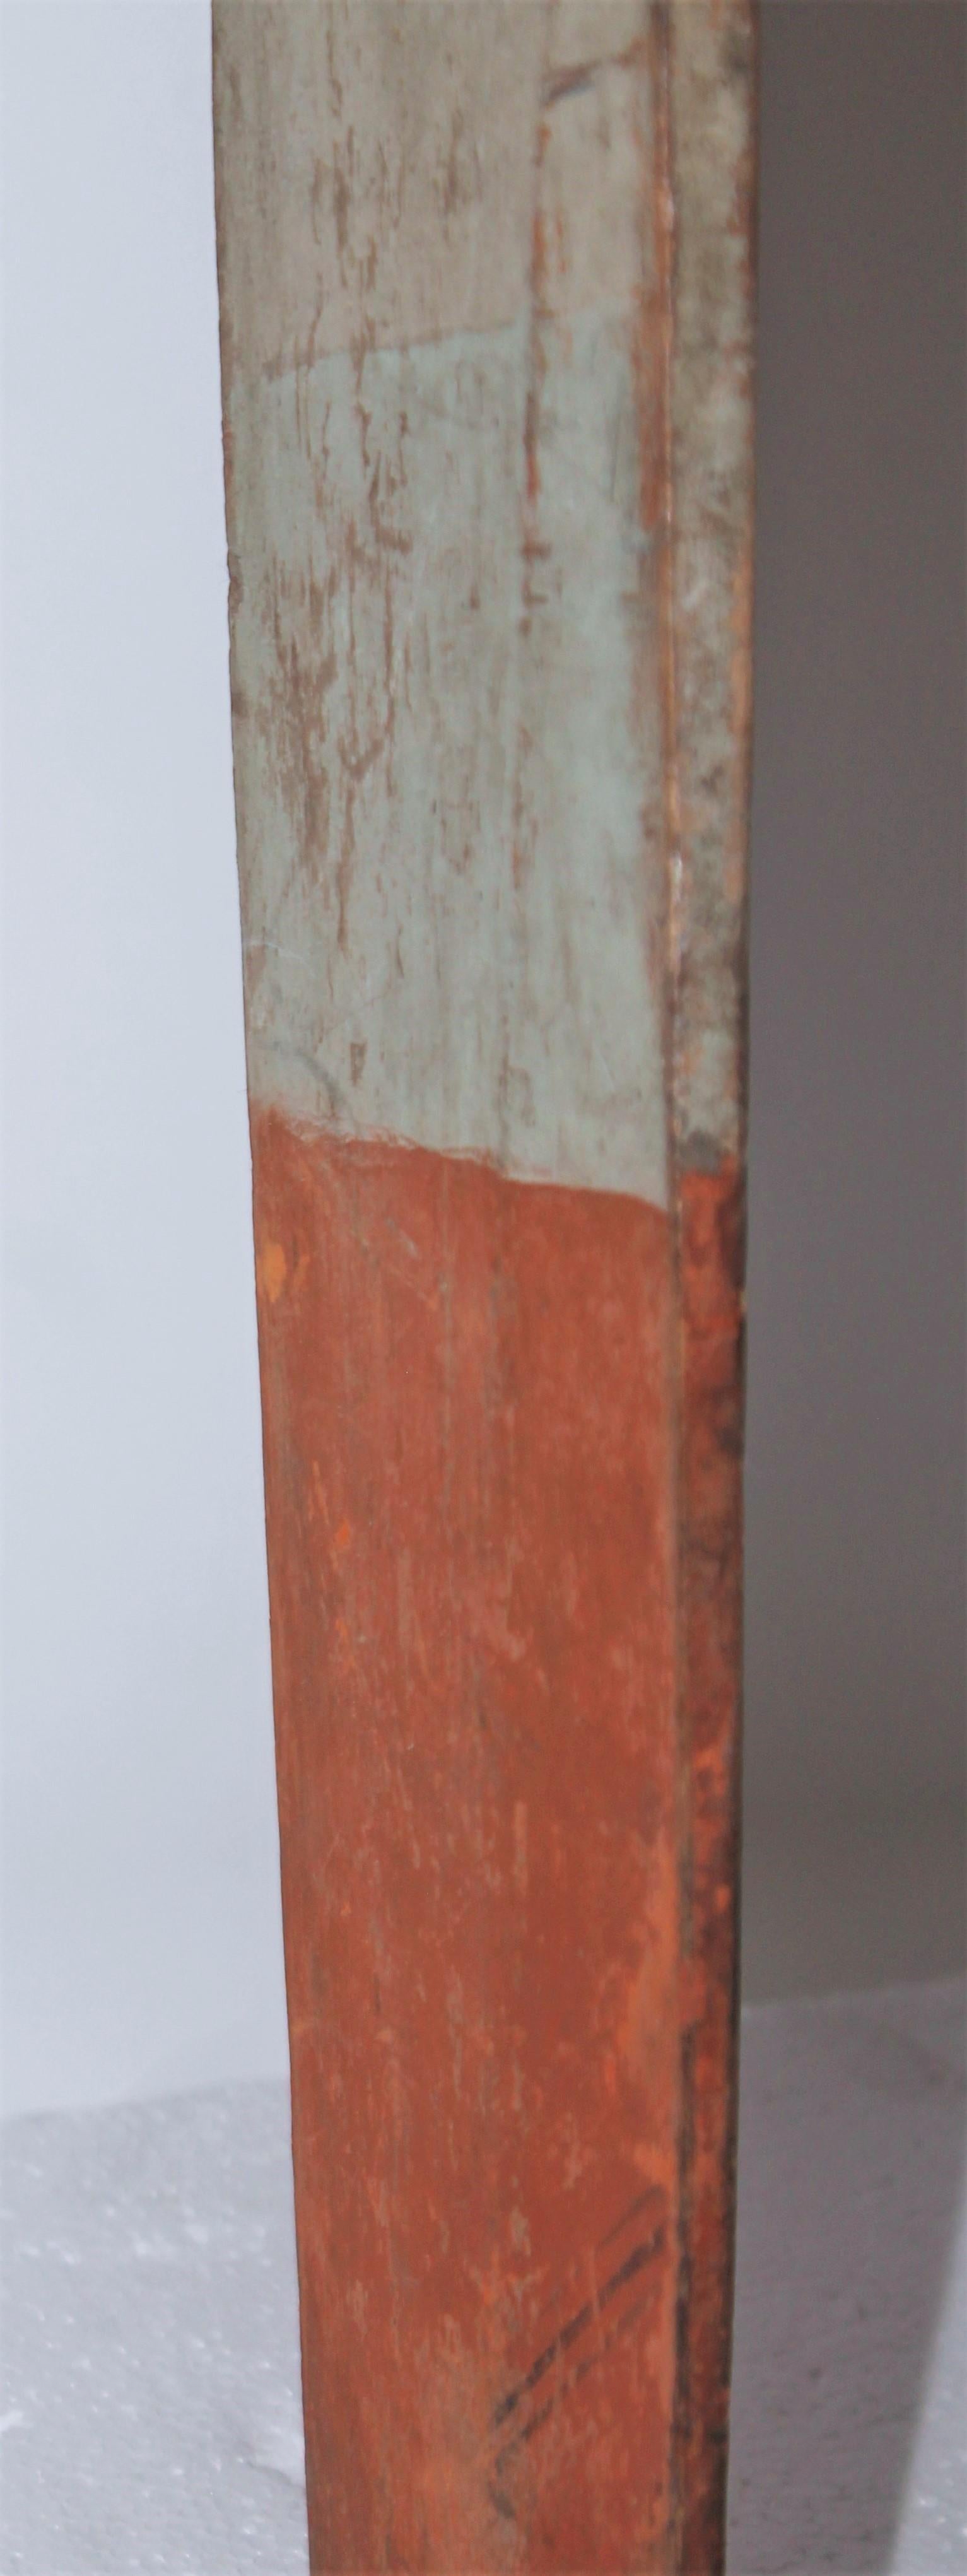 Hand-Painted 19thc Original Painted White & Orange Paddle For Sale